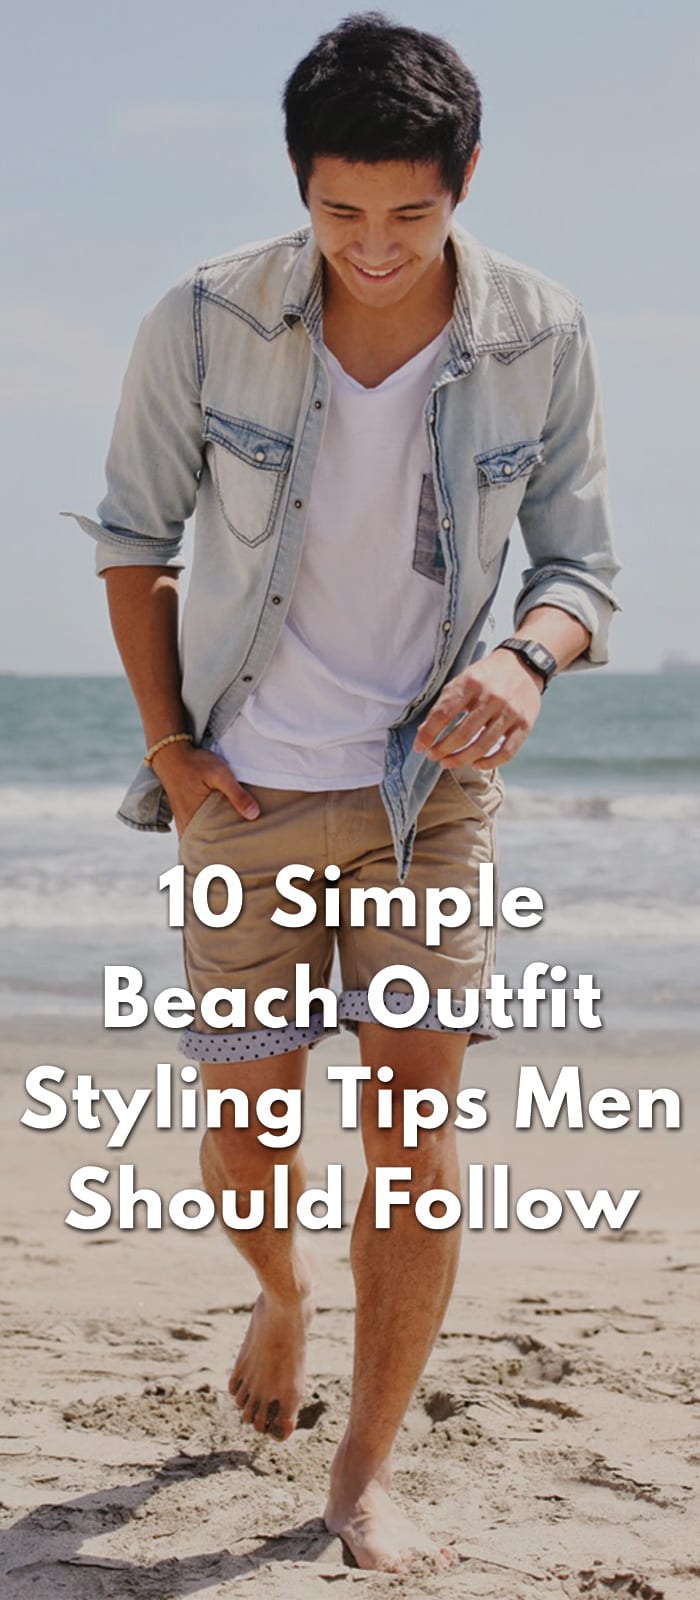 10-Simple-Beach-Outfit-Styling-Tips-Men-Should-Follow